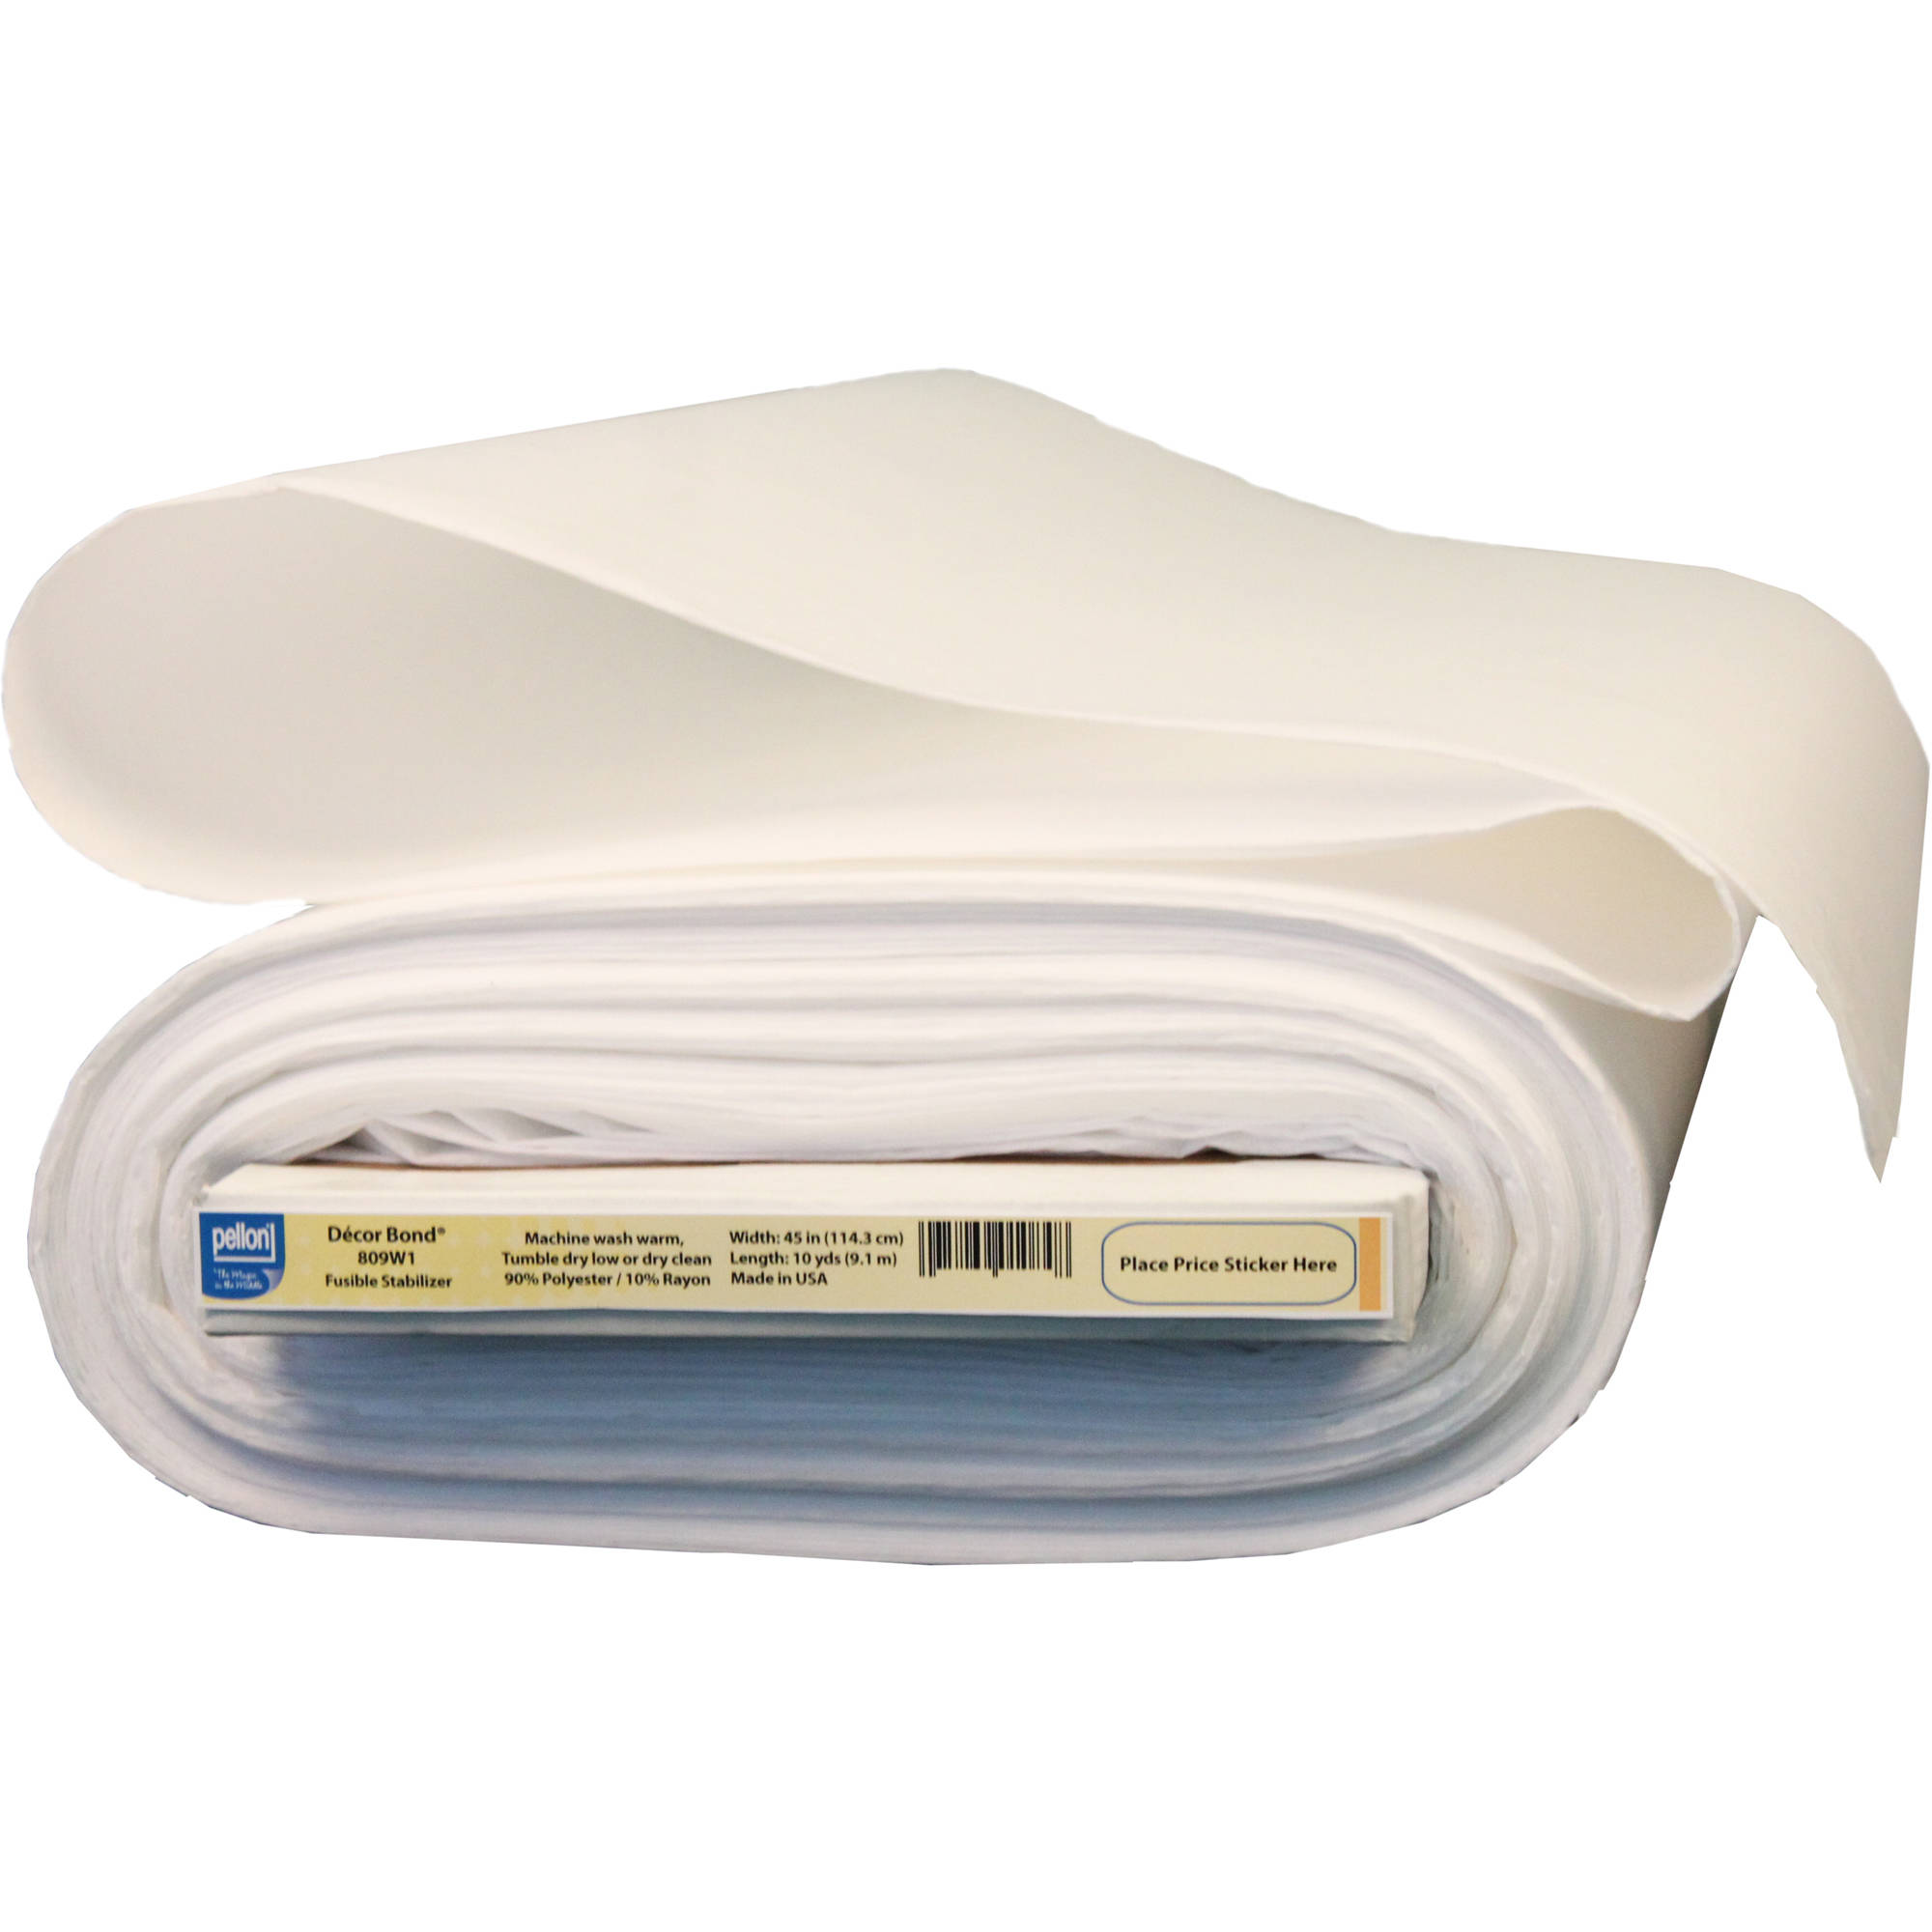 Pellon 809 Décor Bond Fusible Fabric Stabilizer. White. 45" x 10 Yards by the Bolt 1 Pack - image 1 of 2